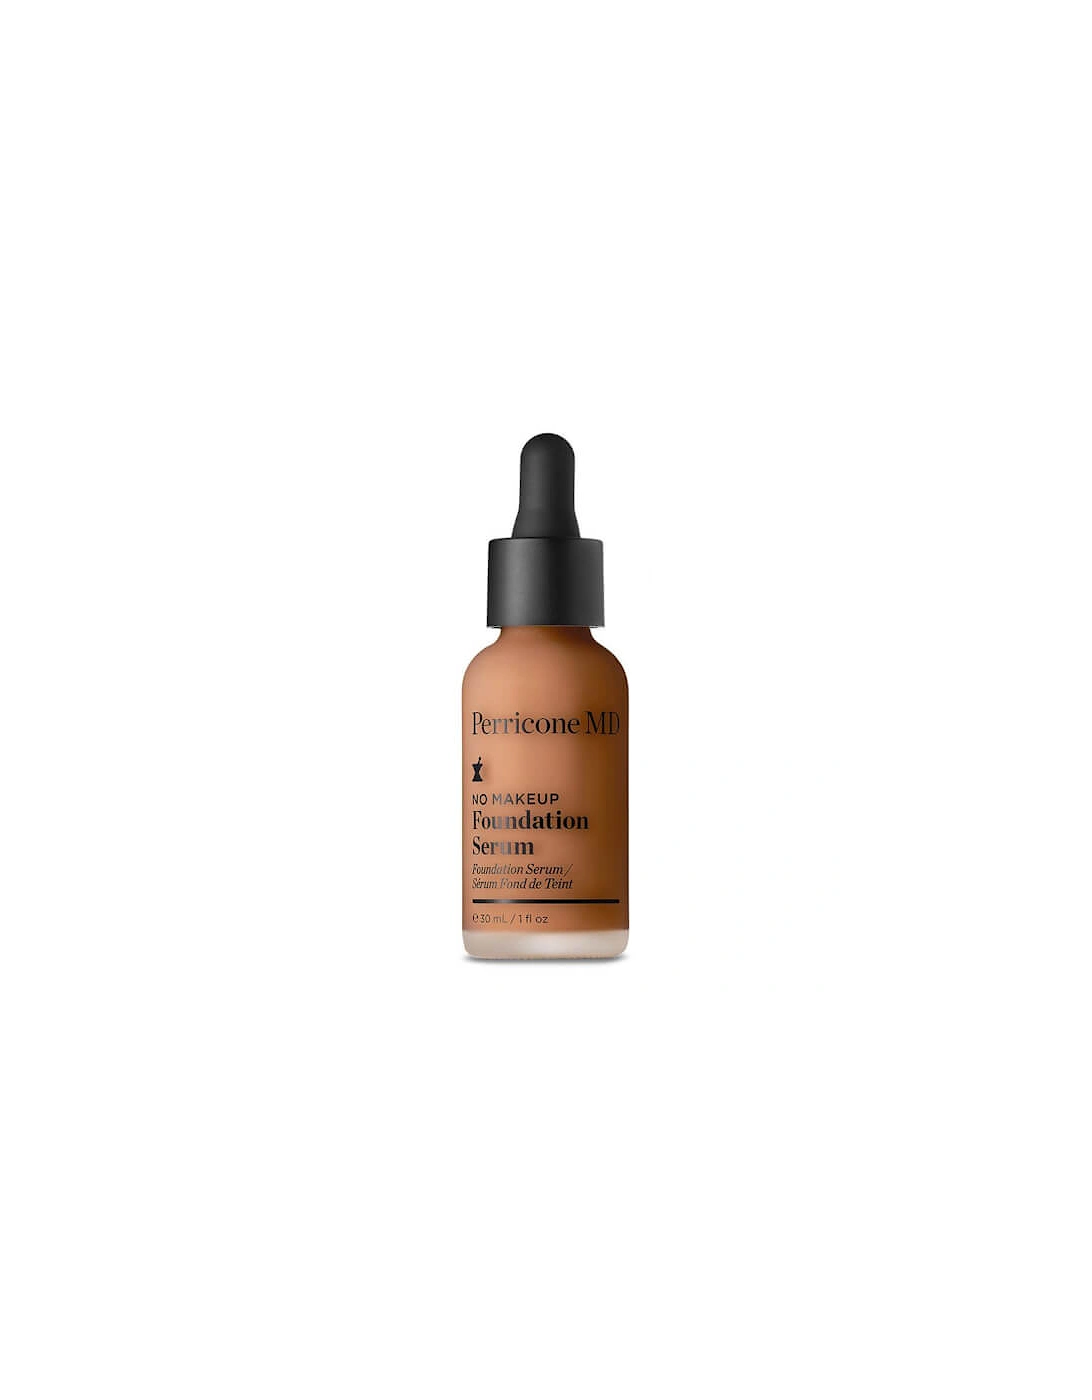 No Makeup Foundation Serum Broad Spectrum SPF20 - Rich - Perricone MD, 2 of 1